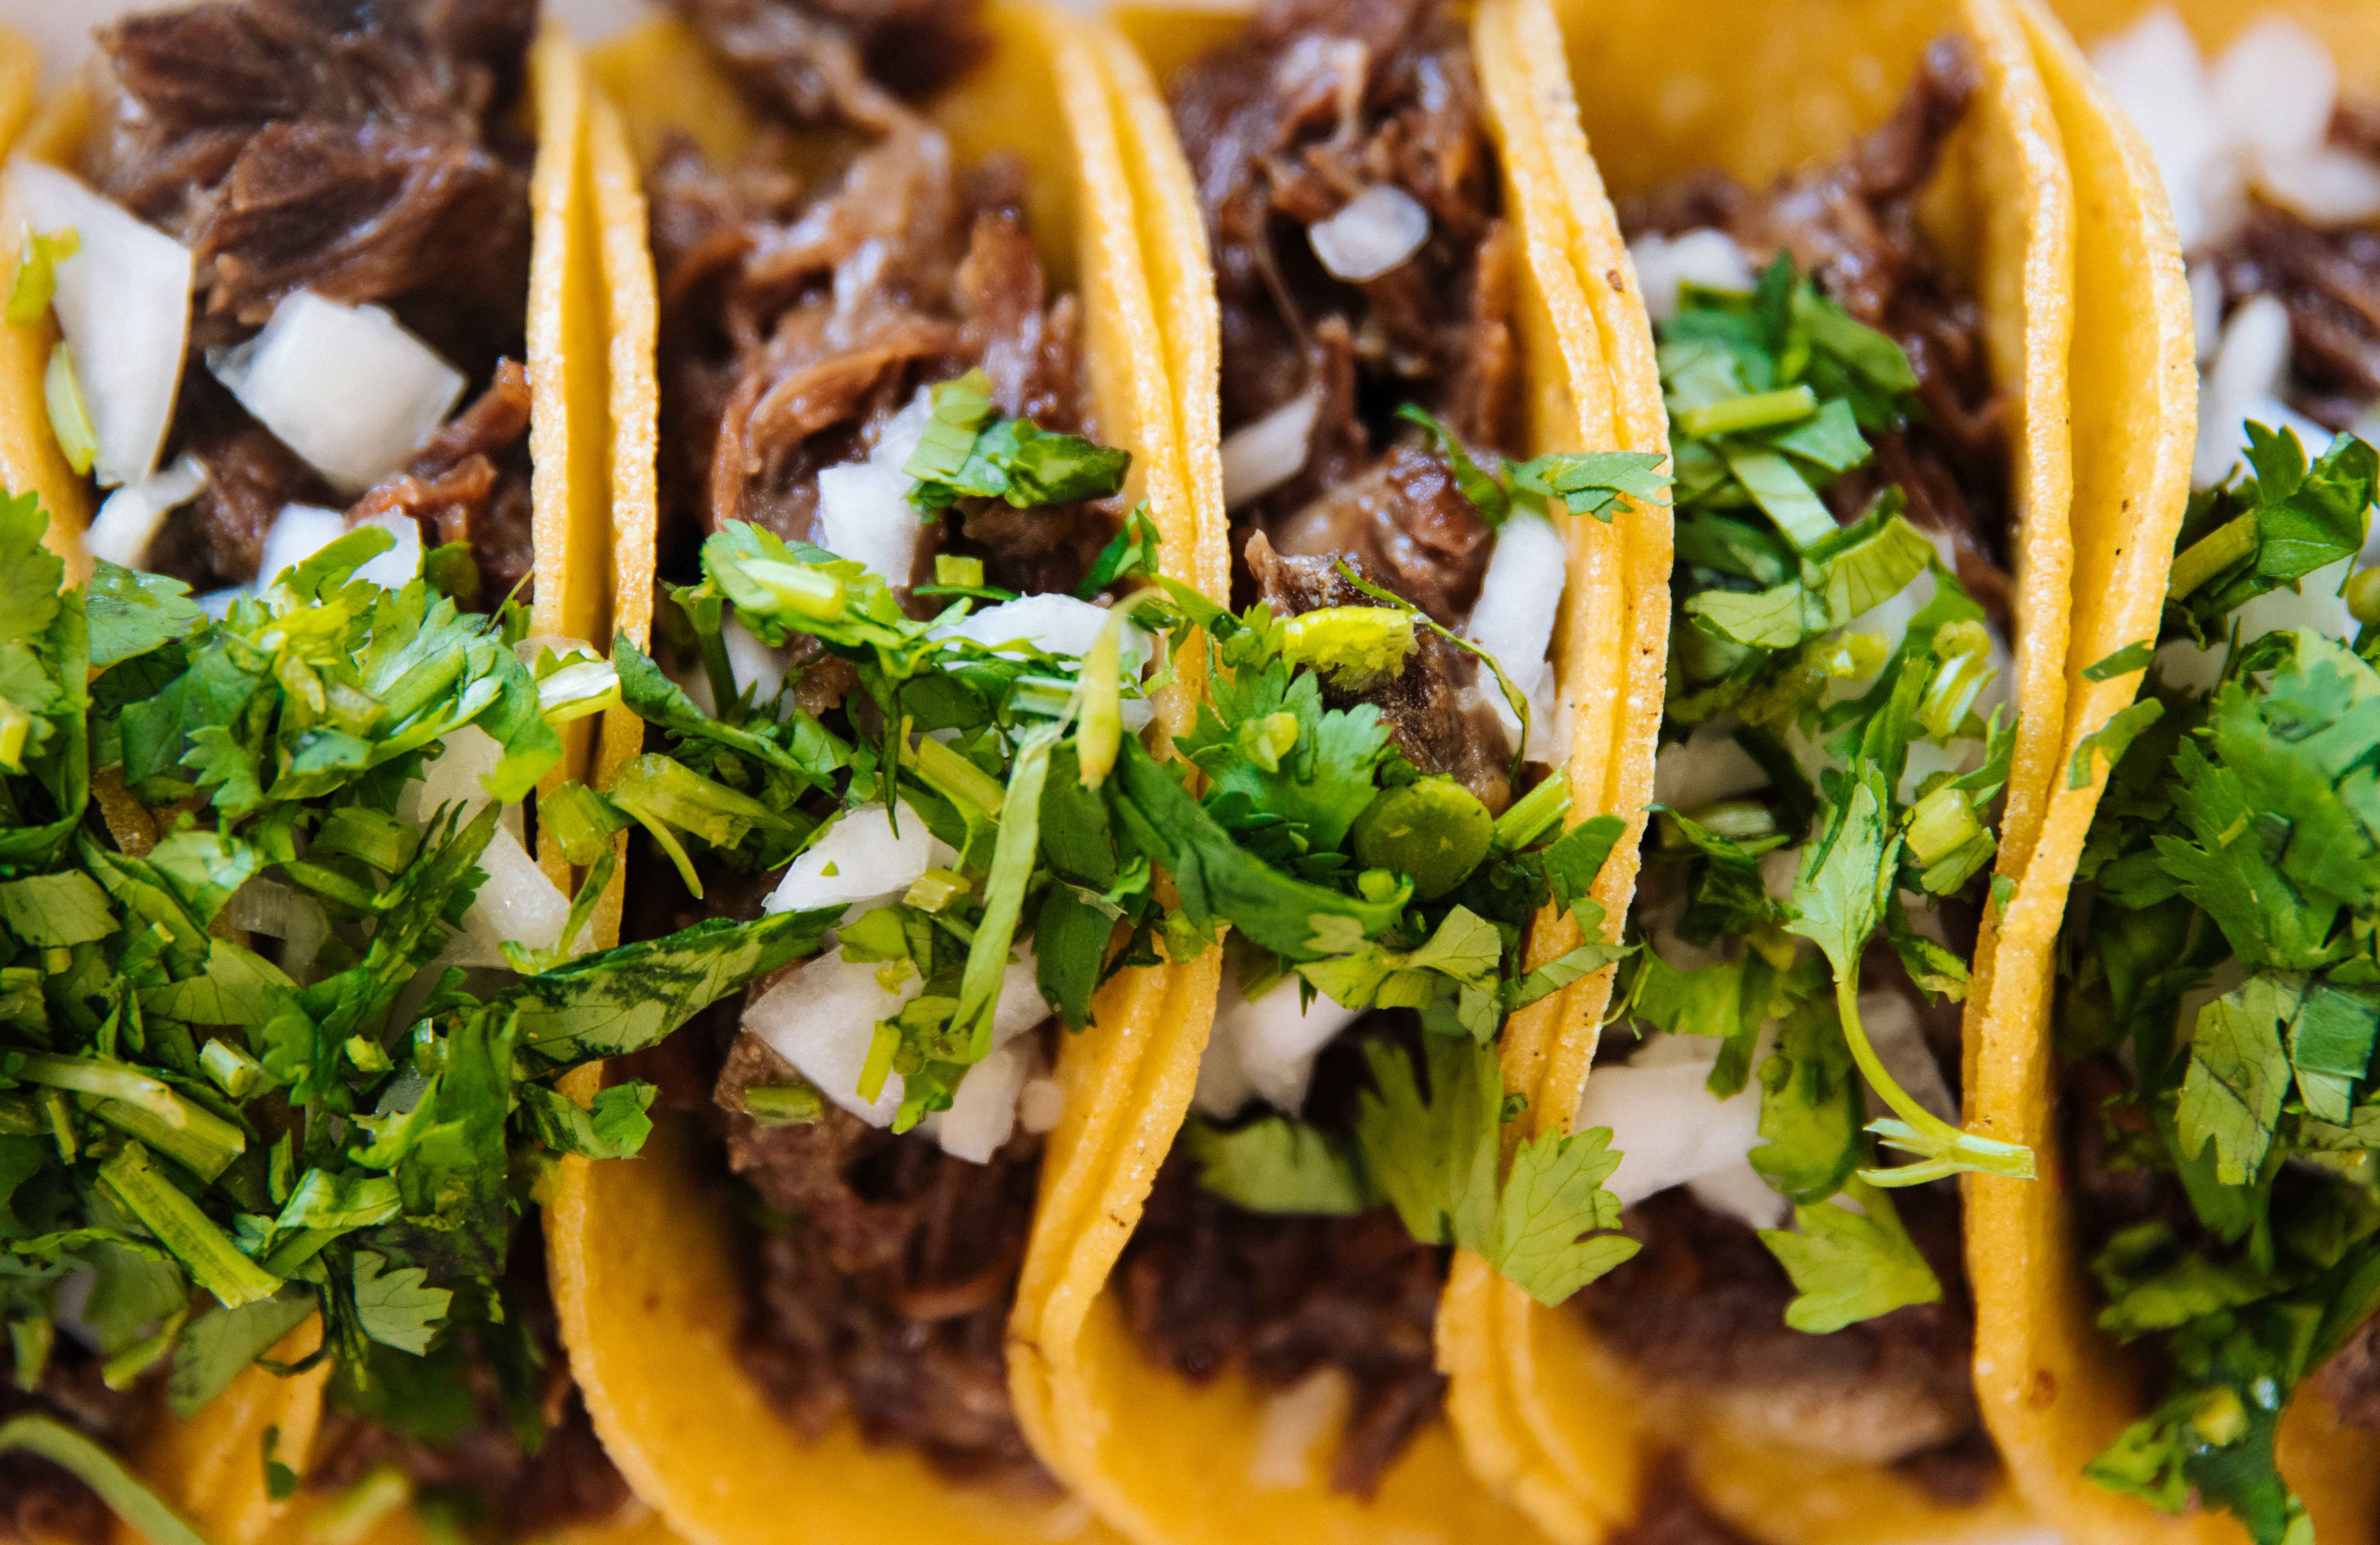 Taco Fest Guide: How to Get to Tiantongyuan Culture &amp; Arts Center&amp; More